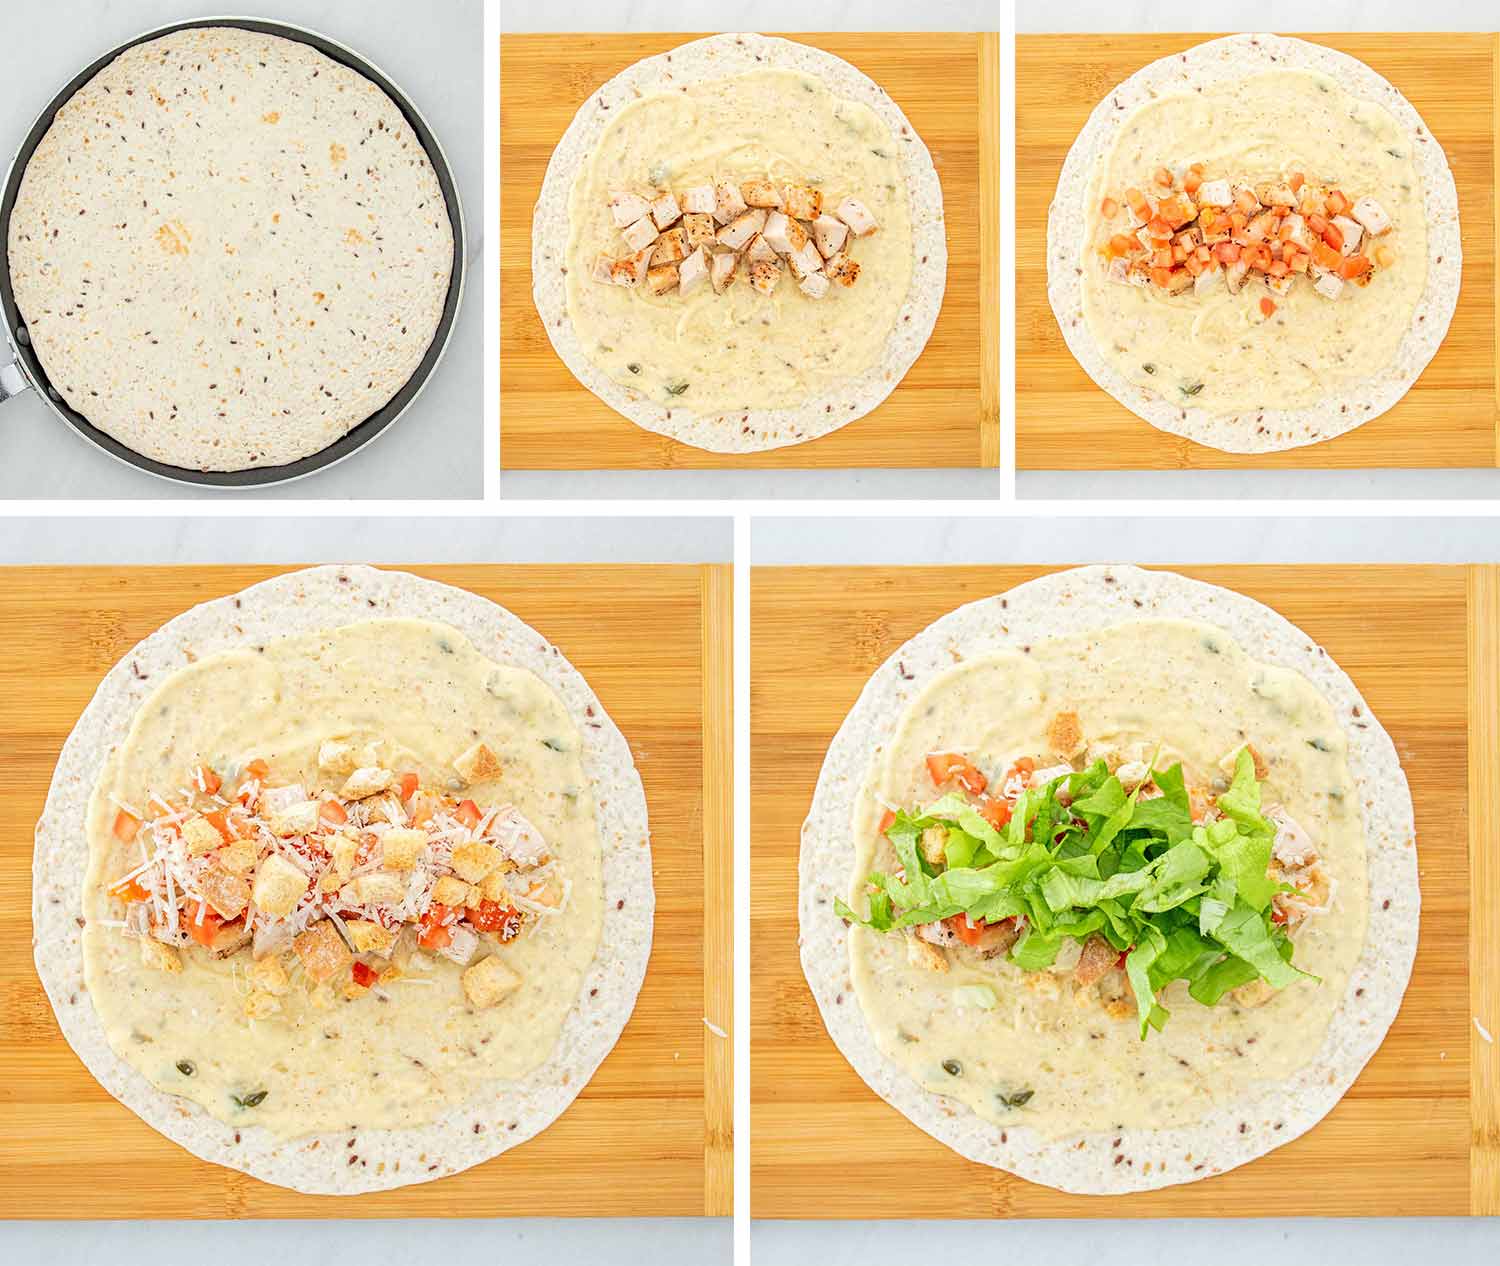 process shots showing how to make chicken caesar wraps.